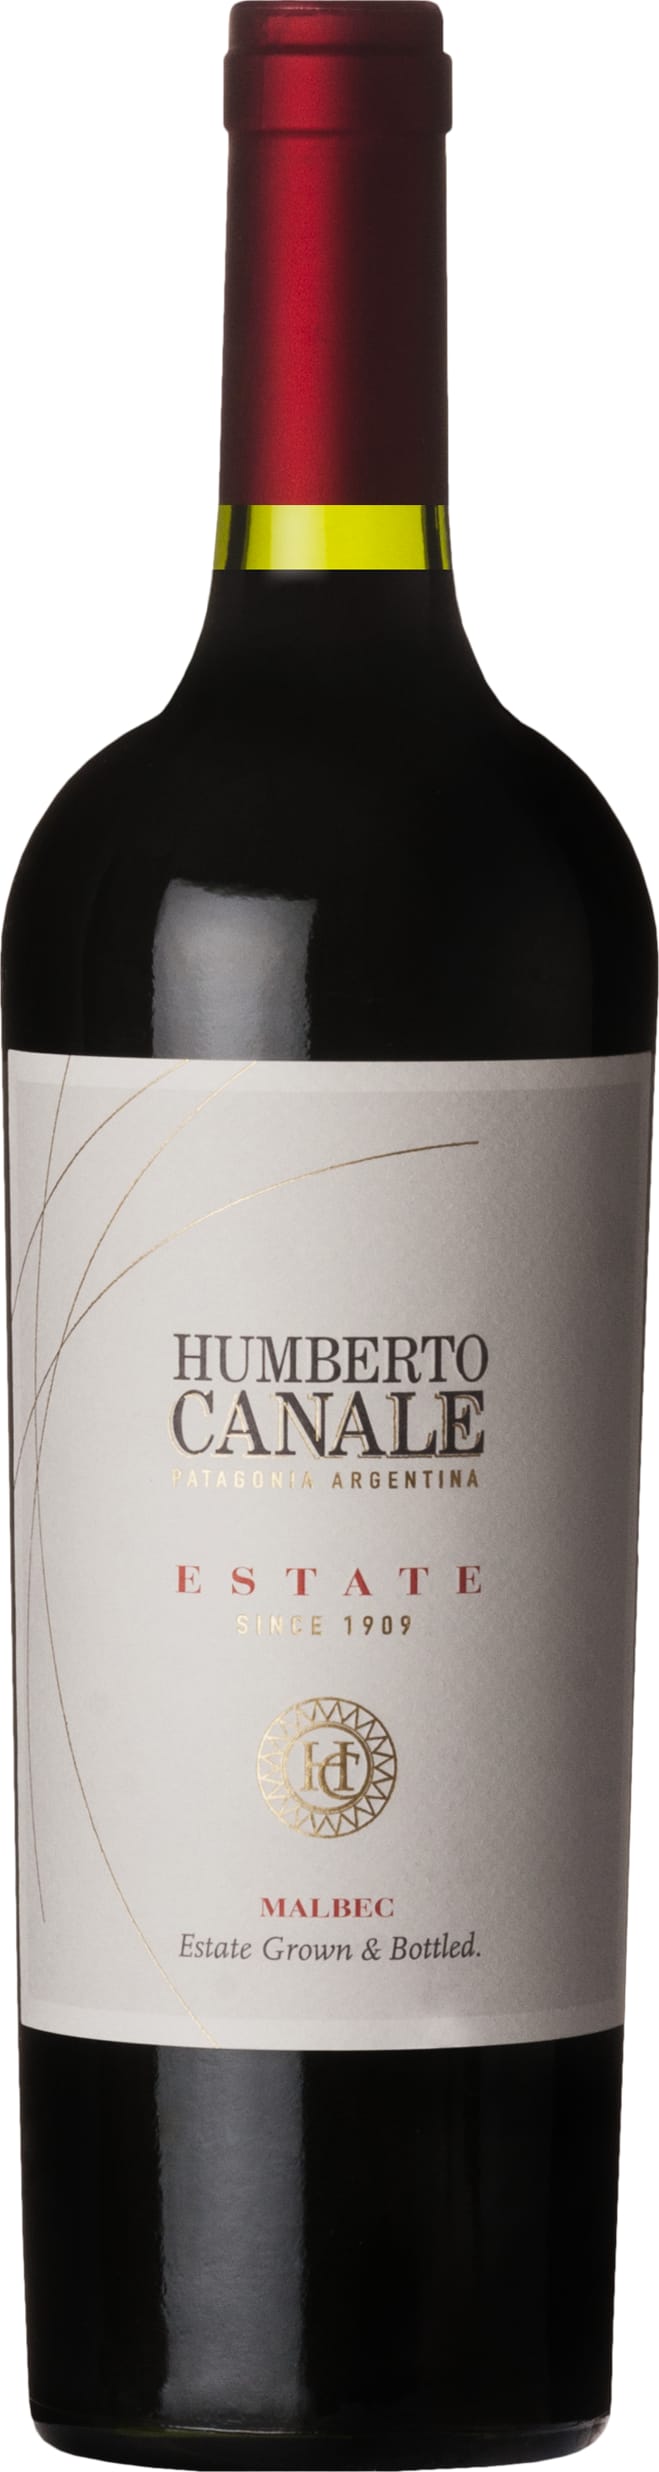 Humberto Canale Estate Malbec 2022 75cl - Buy Humberto Canale Wines from GREAT WINES DIRECT wine shop